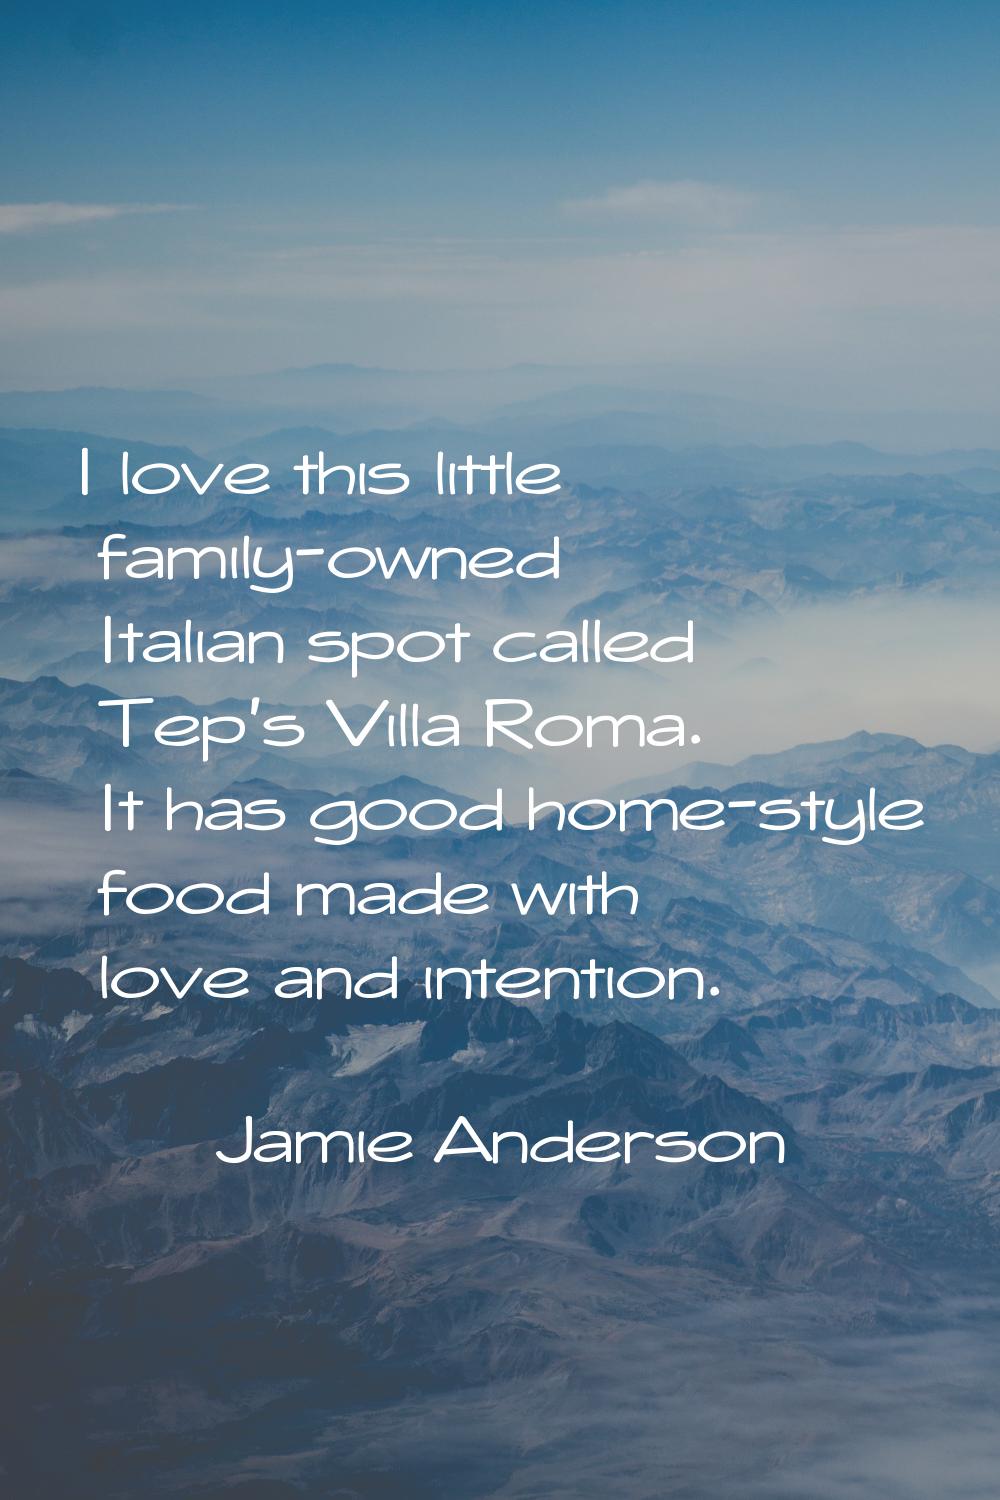 I love this little family-owned Italian spot called Tep's Villa Roma. It has good home-style food m